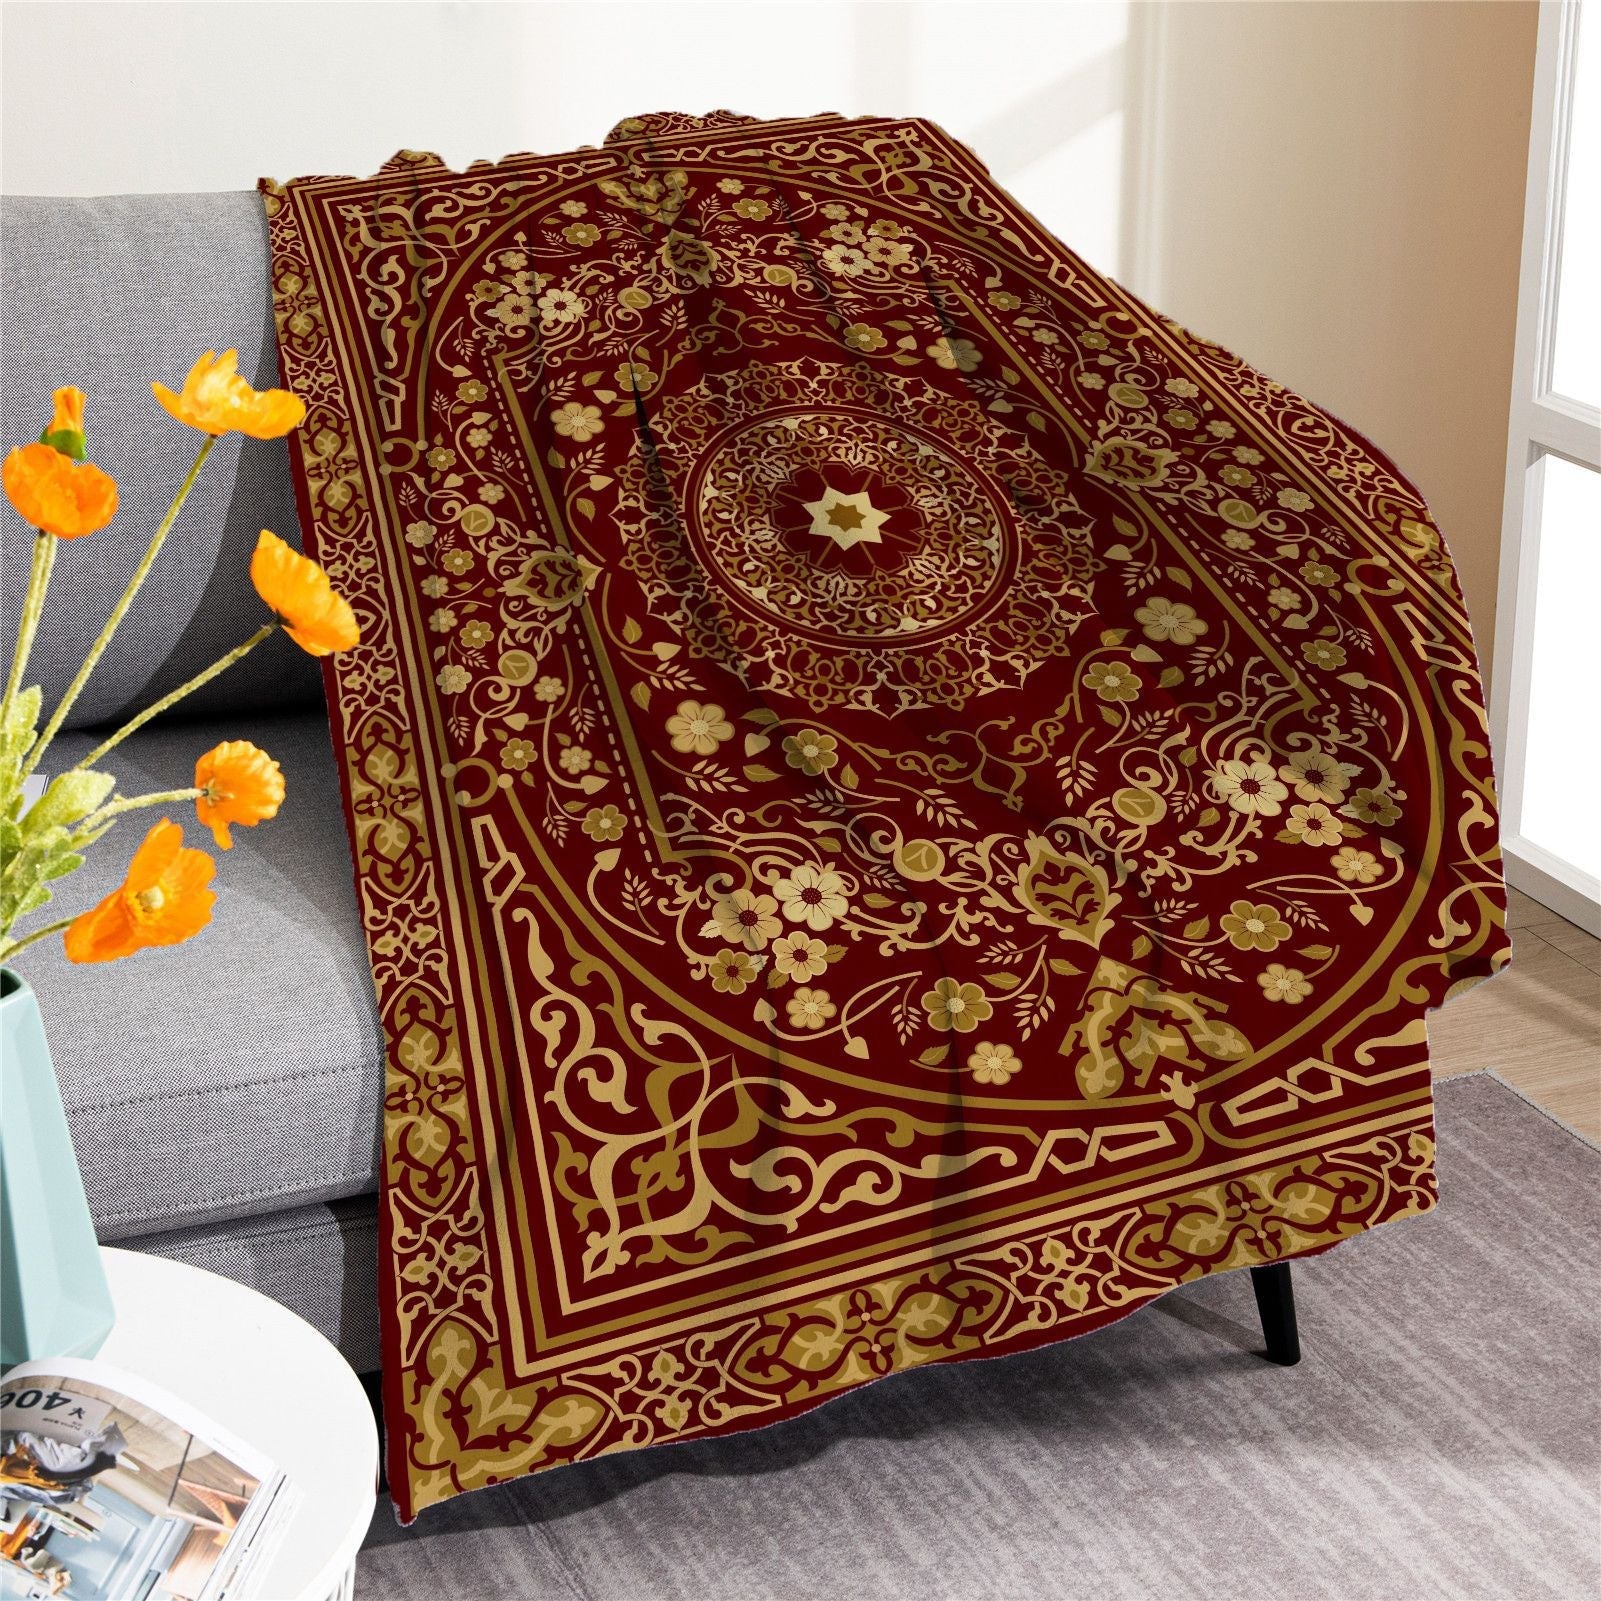 Vintage Boho Fleece Throw Blankets-Blankets-M20220701-1-50*60 Inches-Free Shipping at meselling99